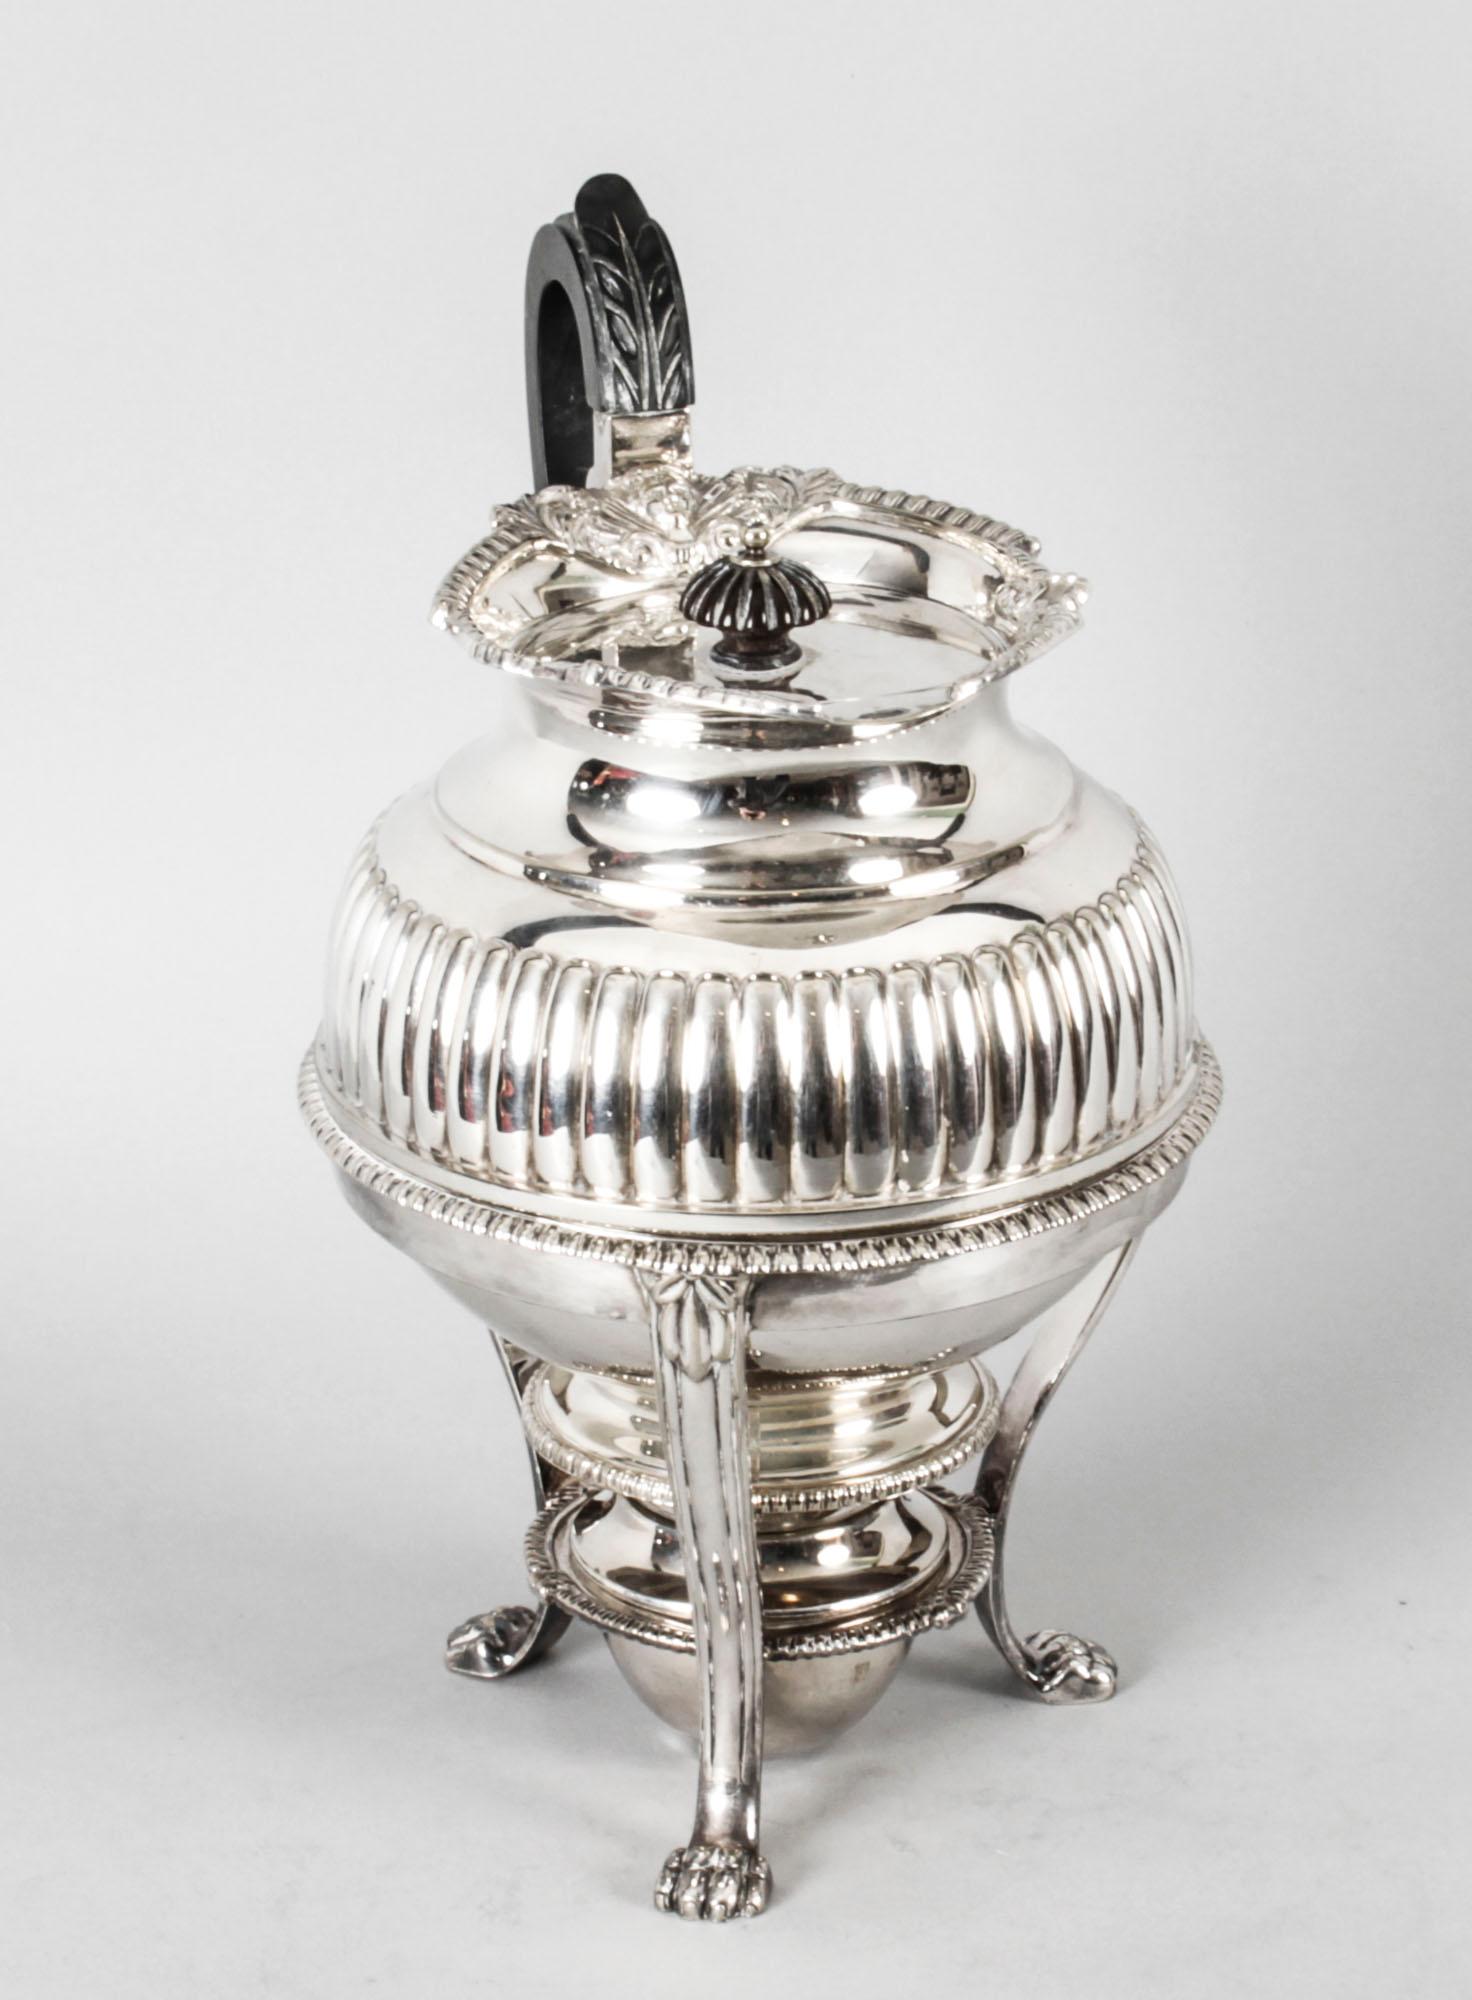 English Antique Silver Plate Coffee Biggin on Stand by Elkington, 19th Century